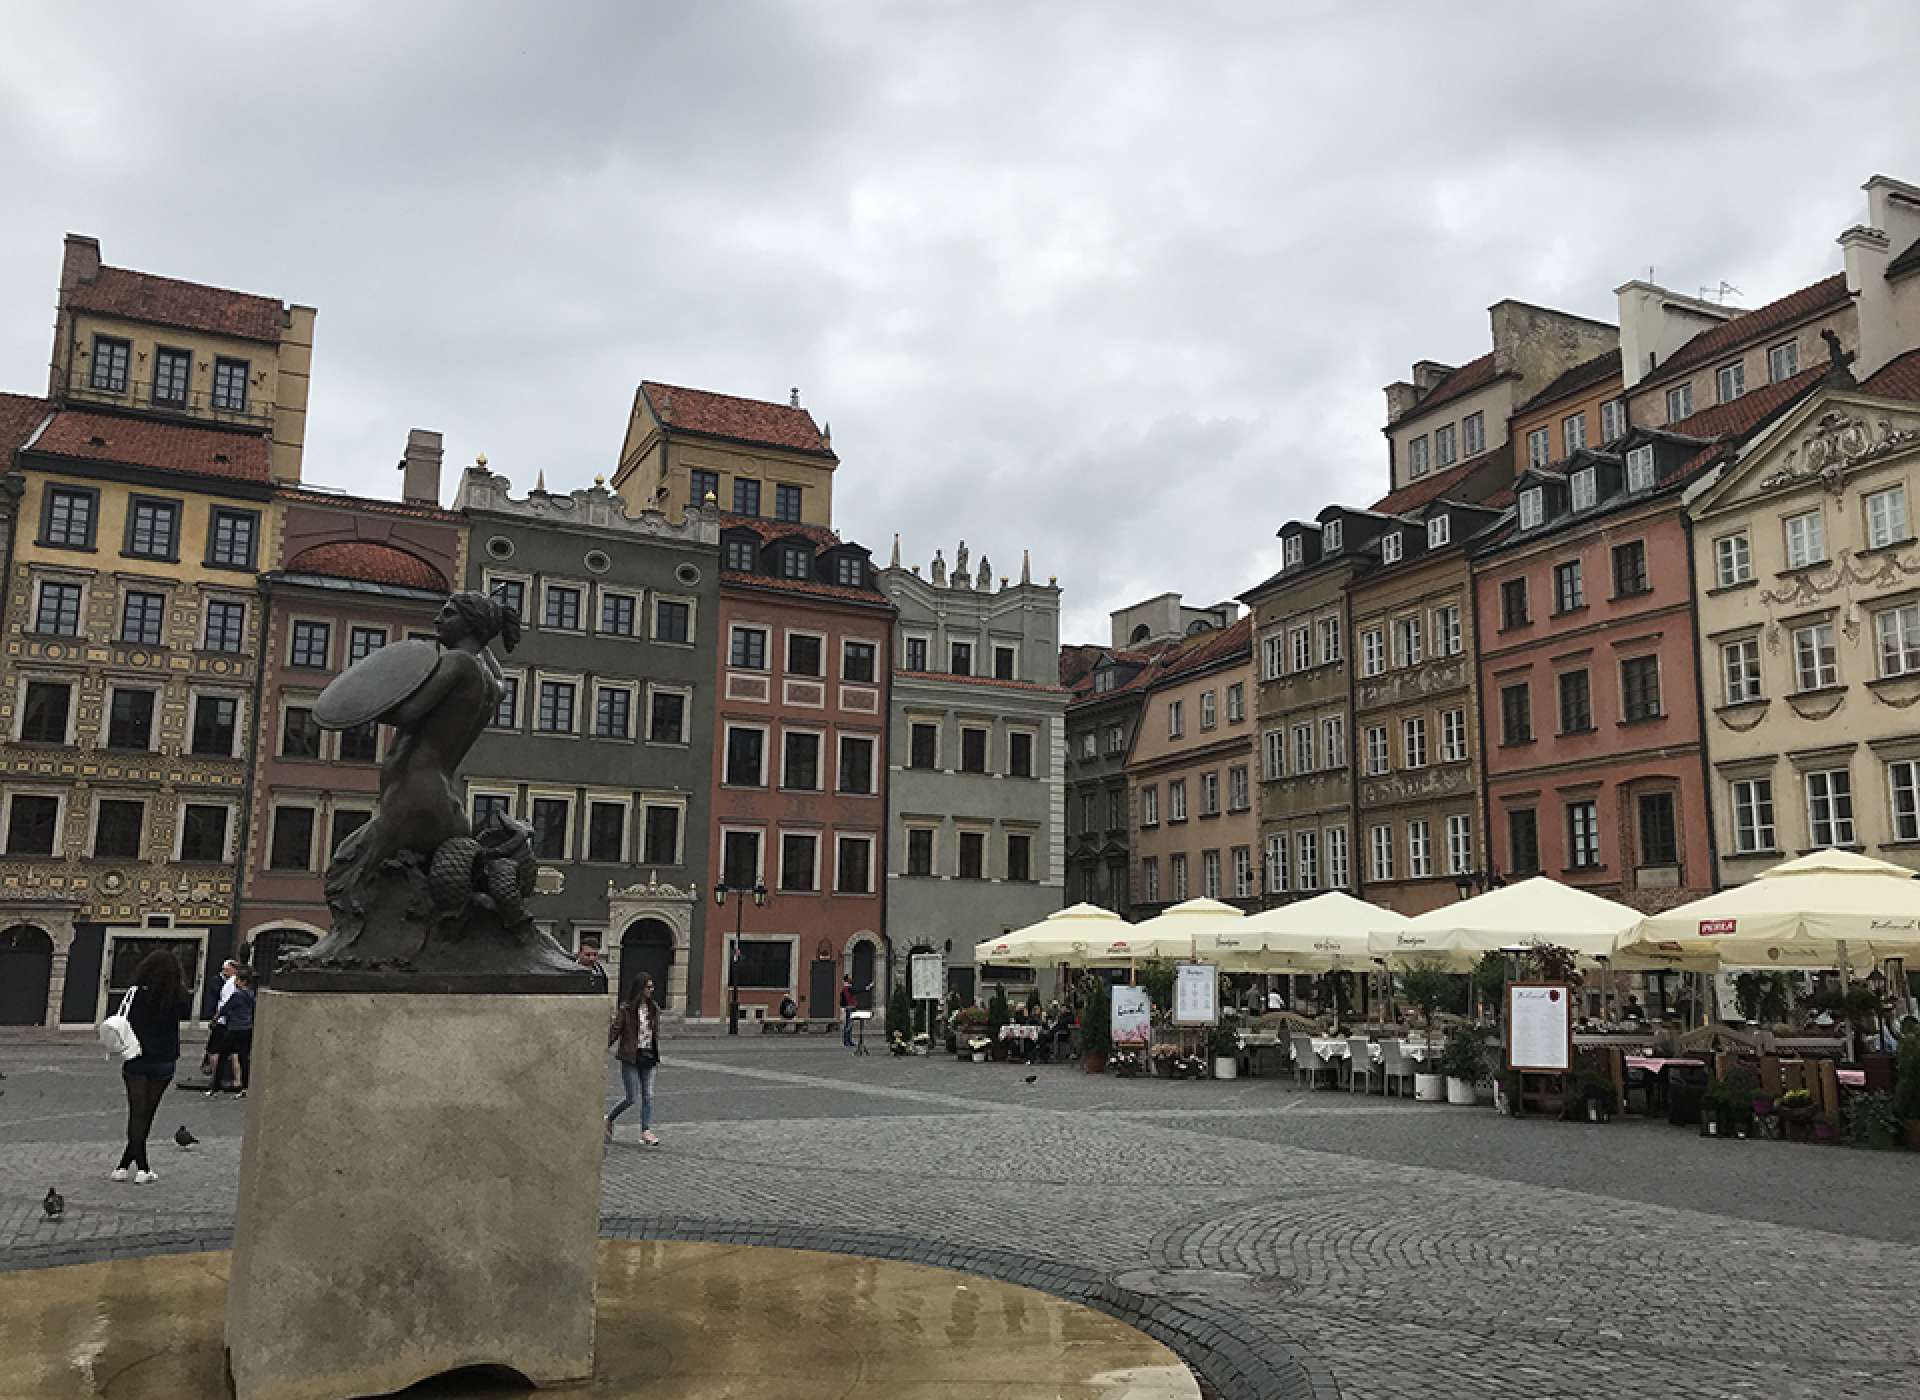 reconstructed Old Town Square